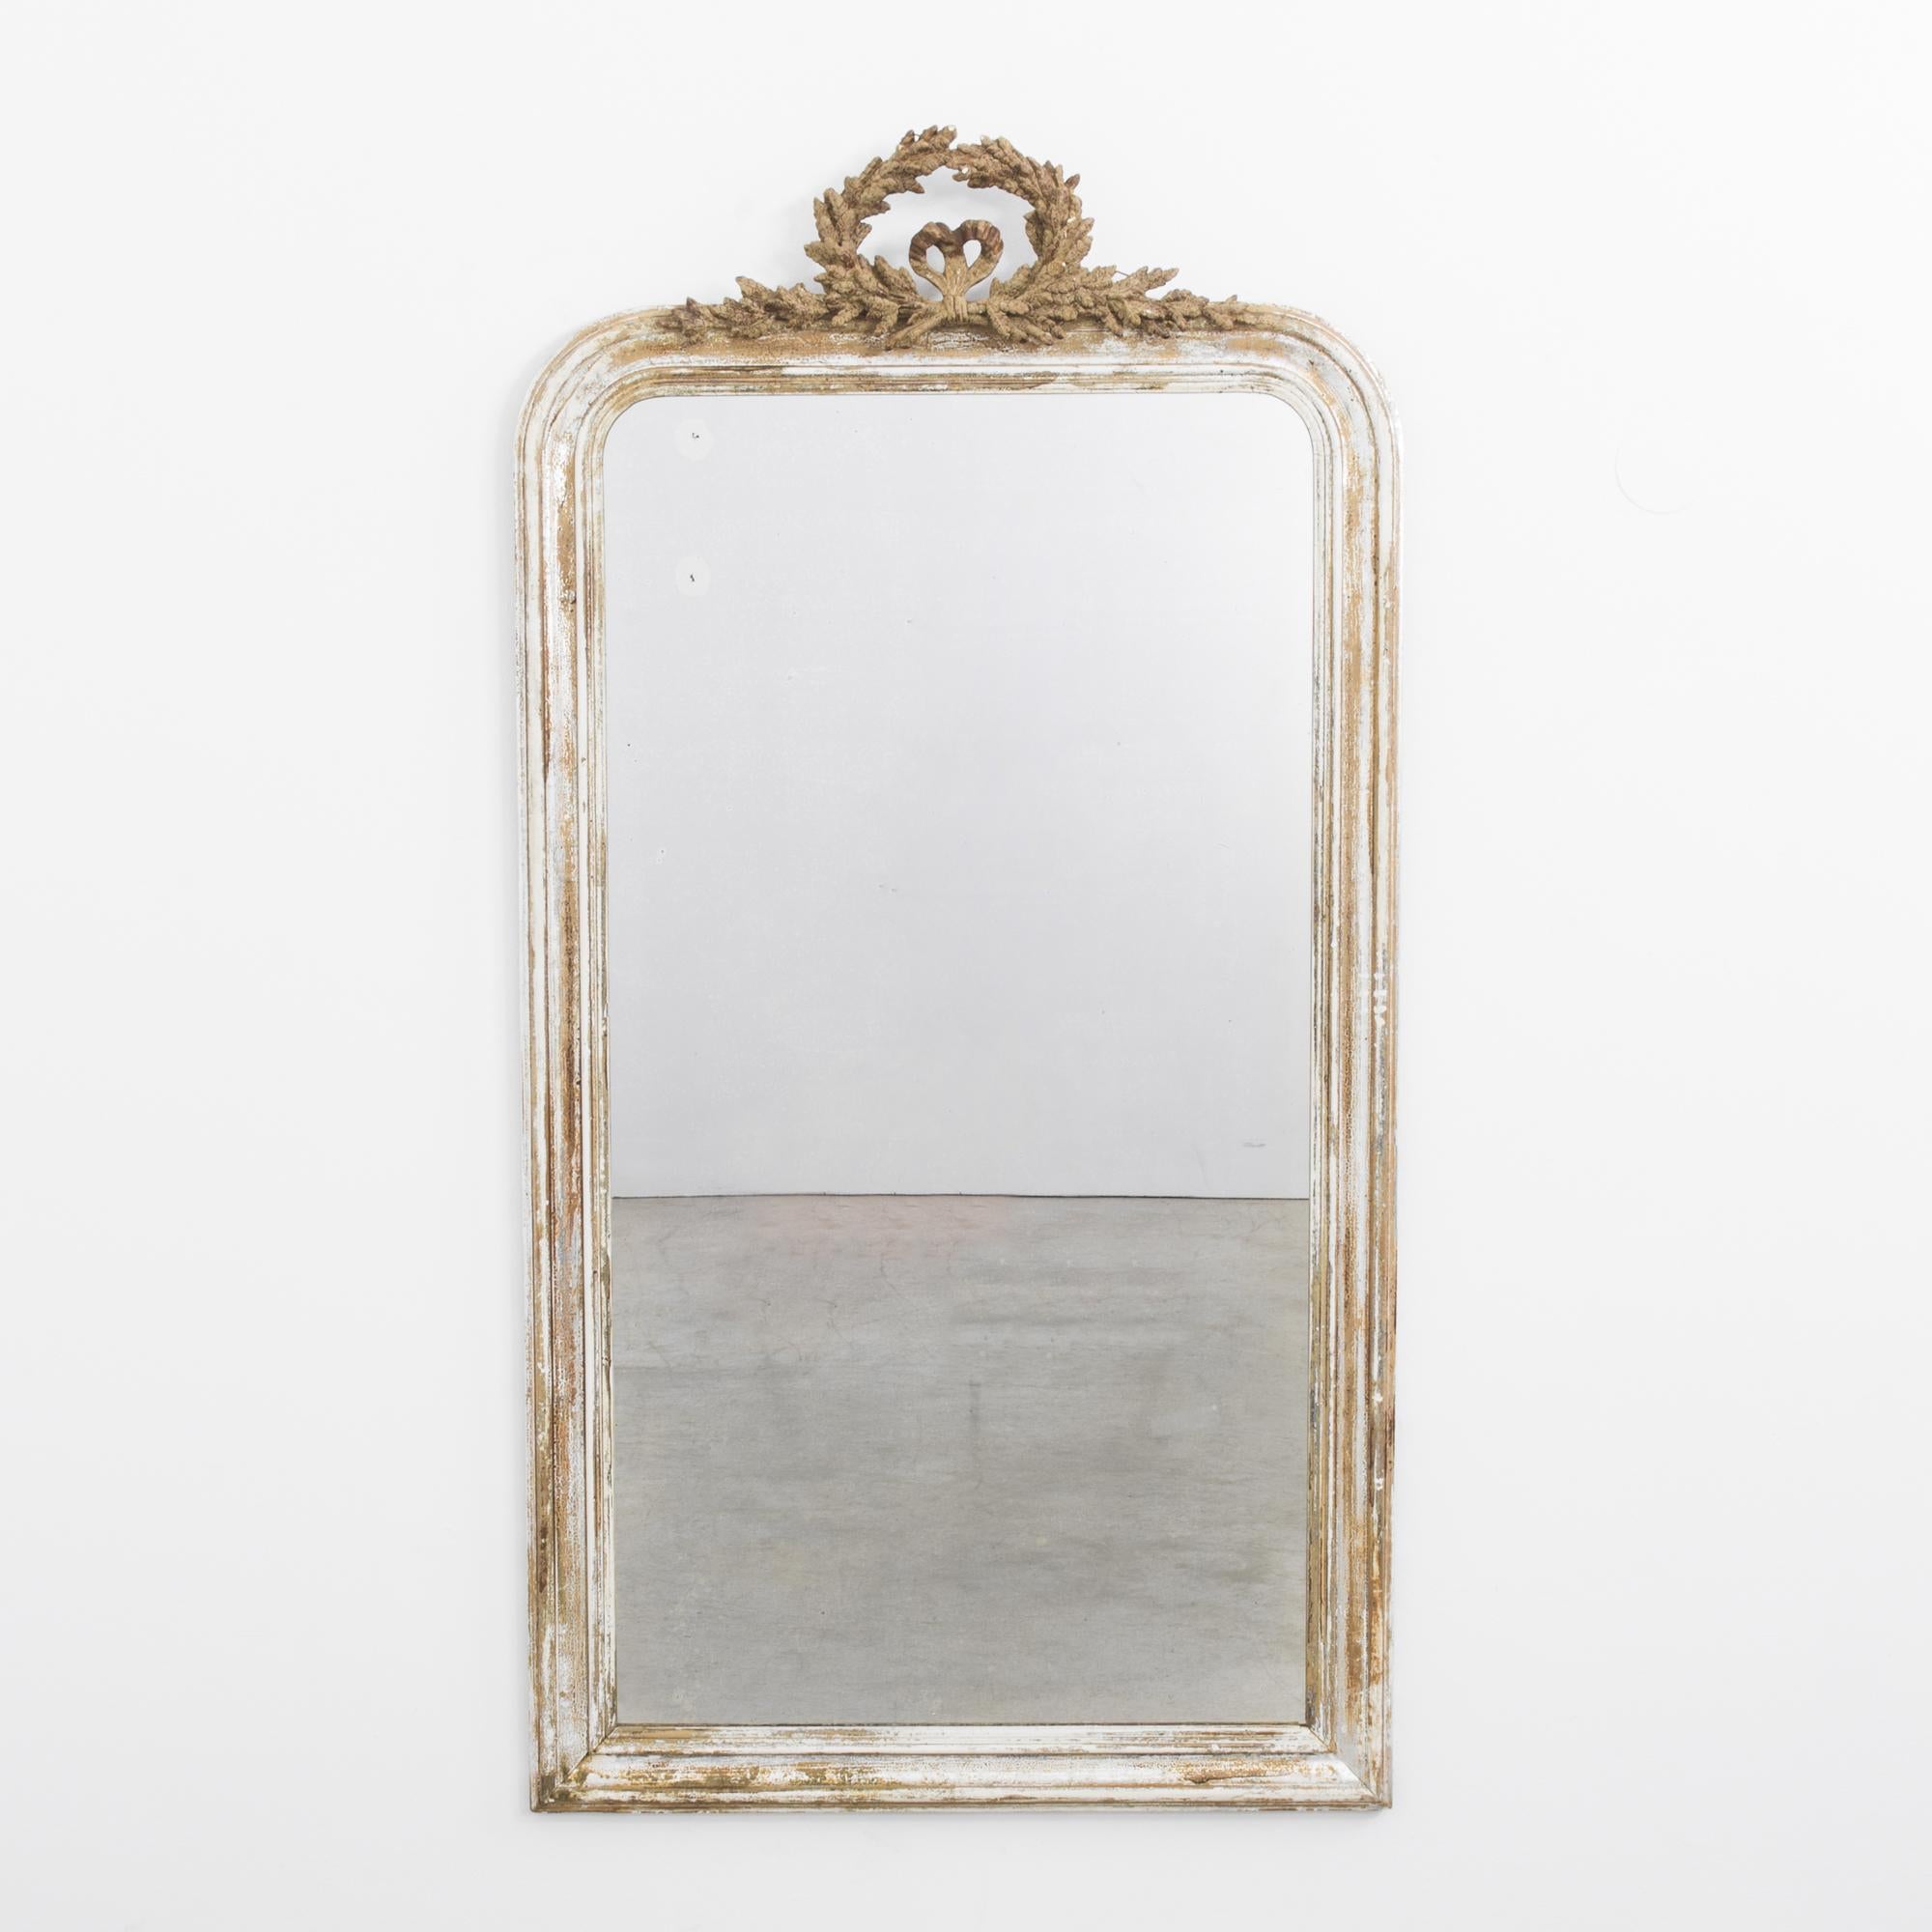 A gilded wooden mirror from France, circa 1880, with a romantic patina of fresh white and muted gold. Tall and stately, the curve of the upper corners of the frame creates an arched silhouette, crowned by a carved laurel wreath. Elegant and